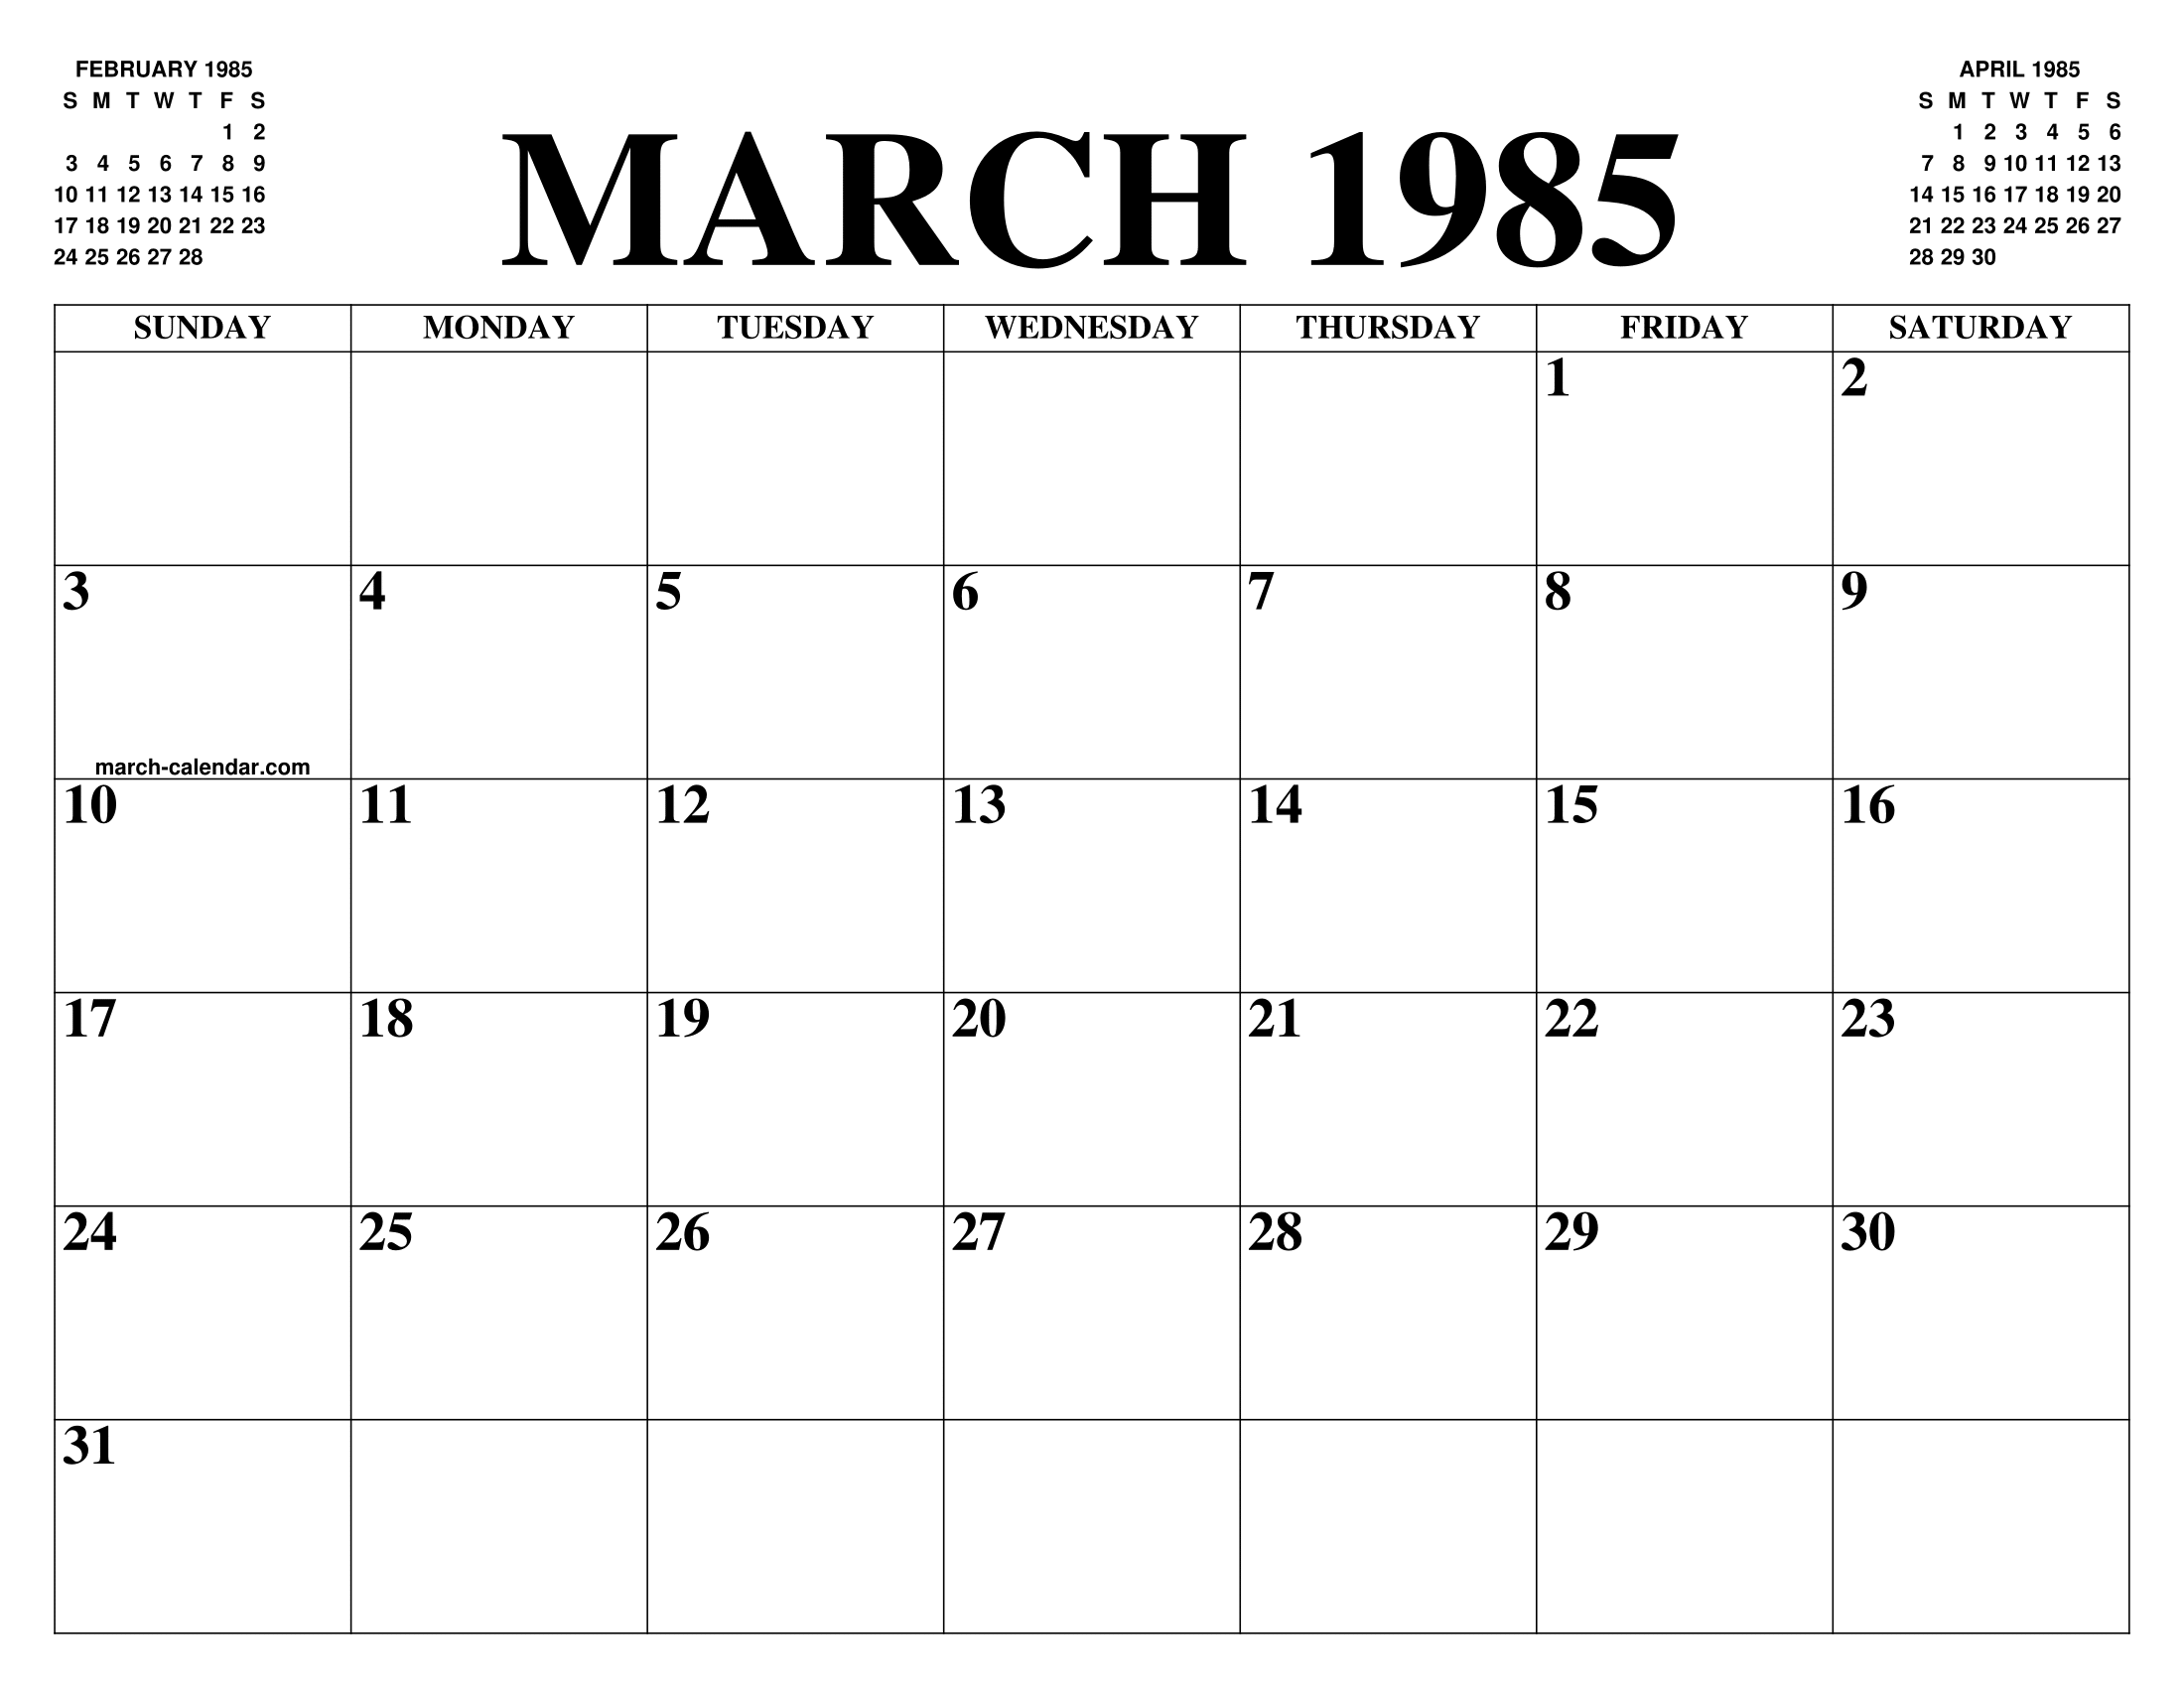 MARCH 1985 CALENDAR OF THE MONTH: FREE PRINTABLE MARCH CALENDAR OF THE